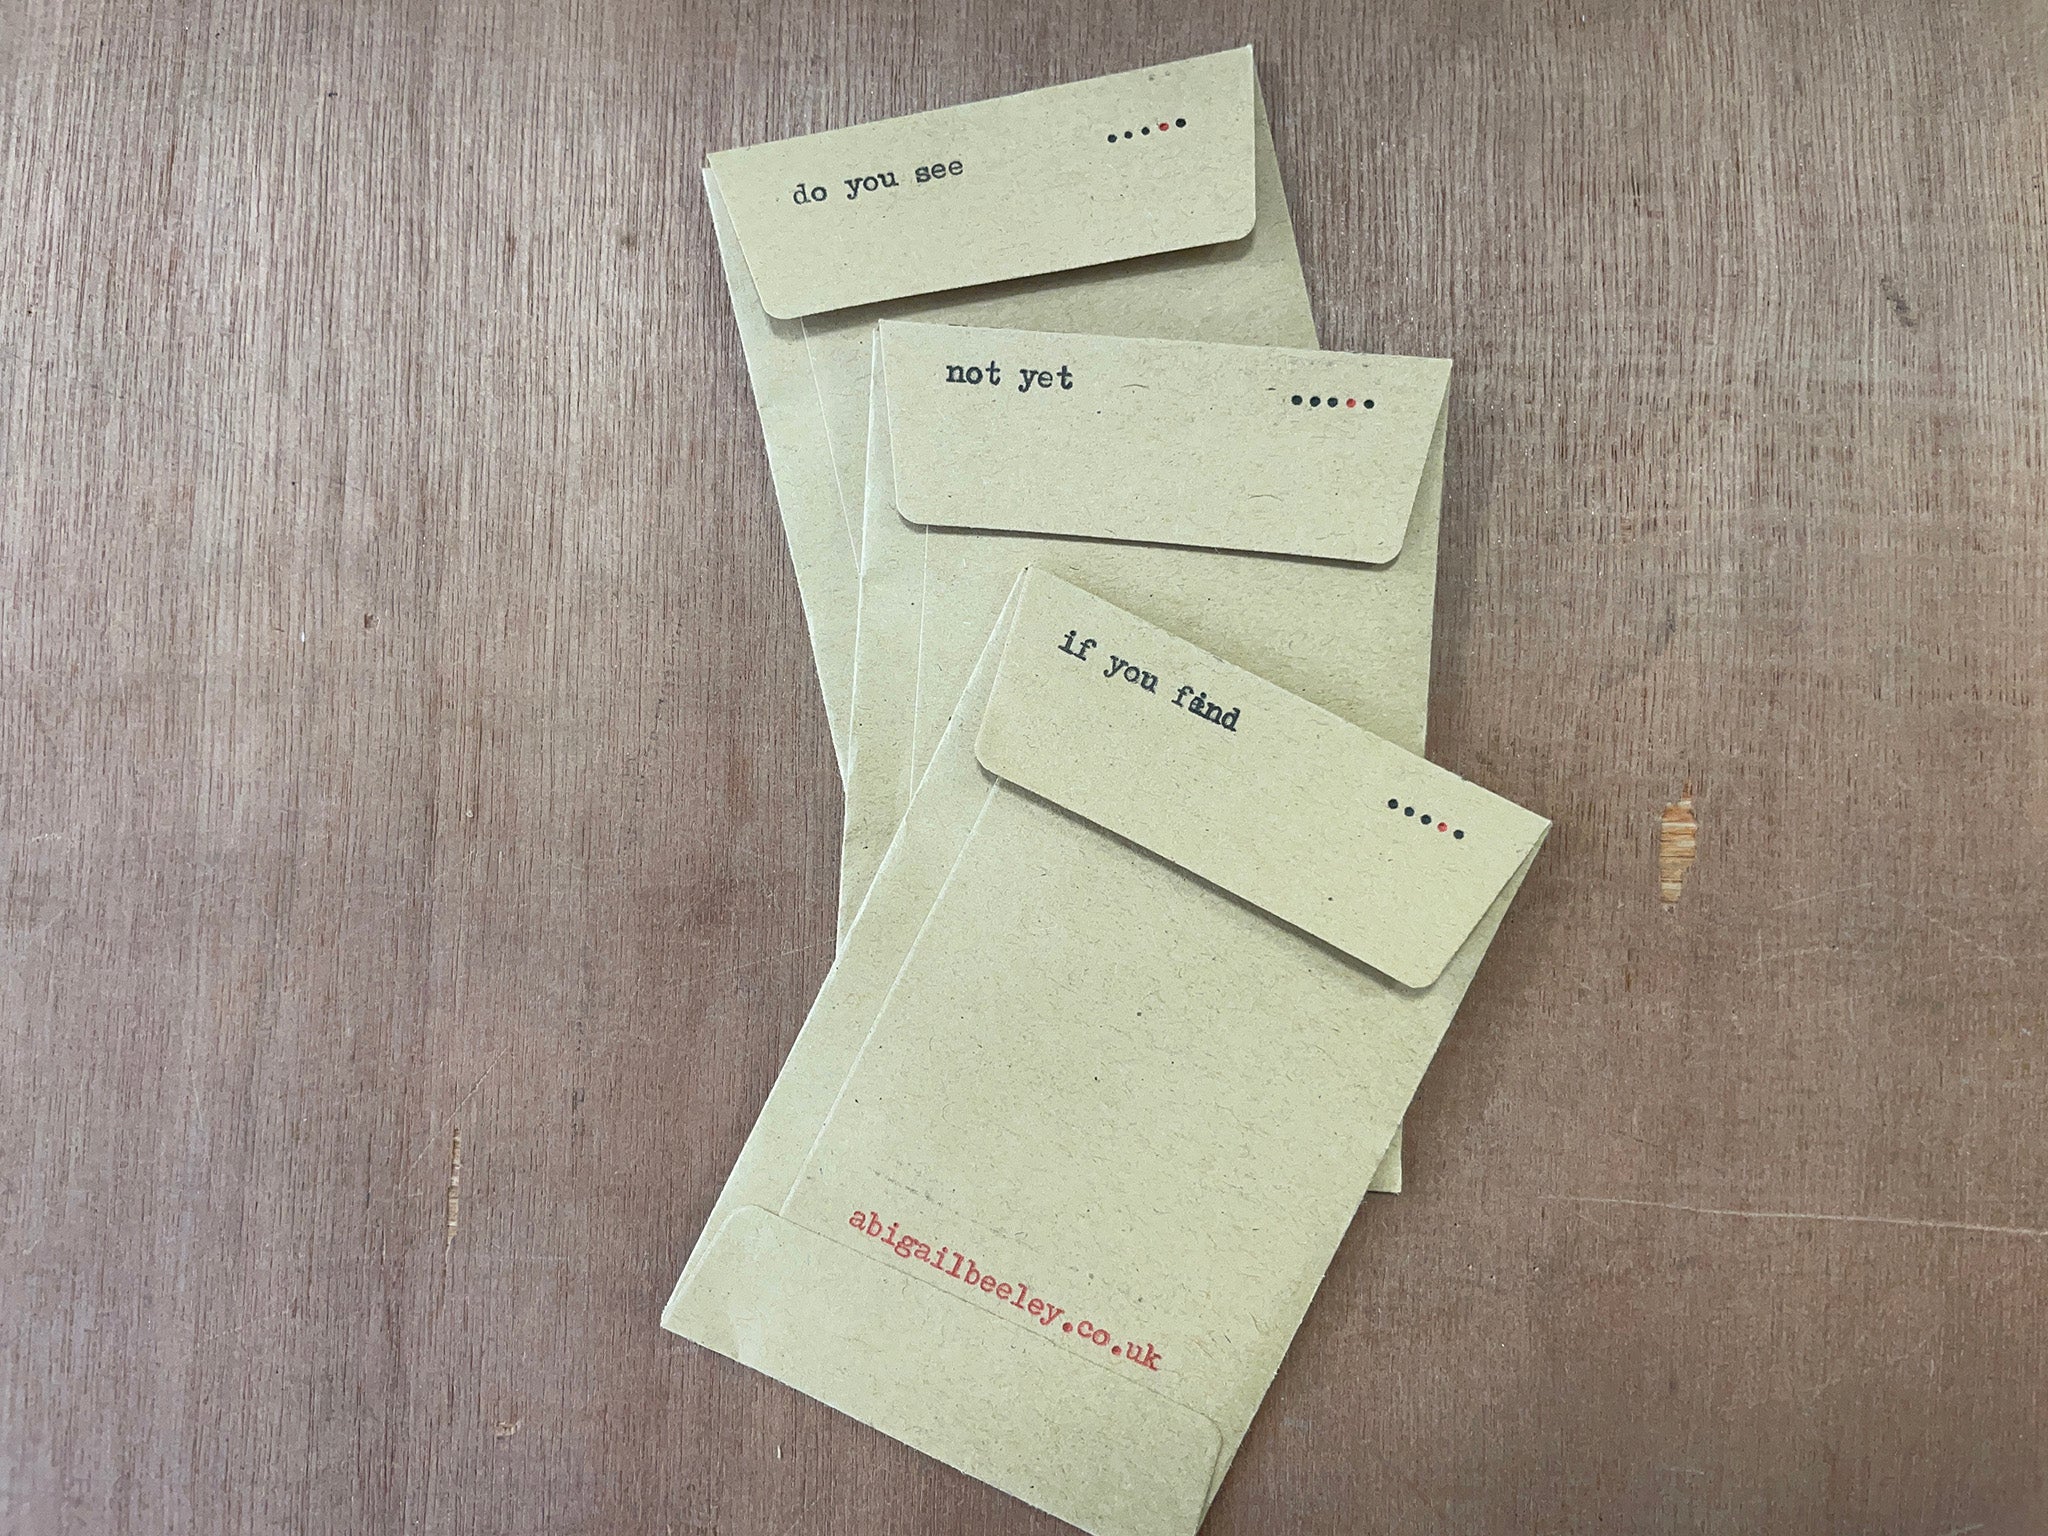 … IF YOU FIND; … DO YOU SEE; … NOT YET : POCKET POETRY SERIES by Abigail Beeley